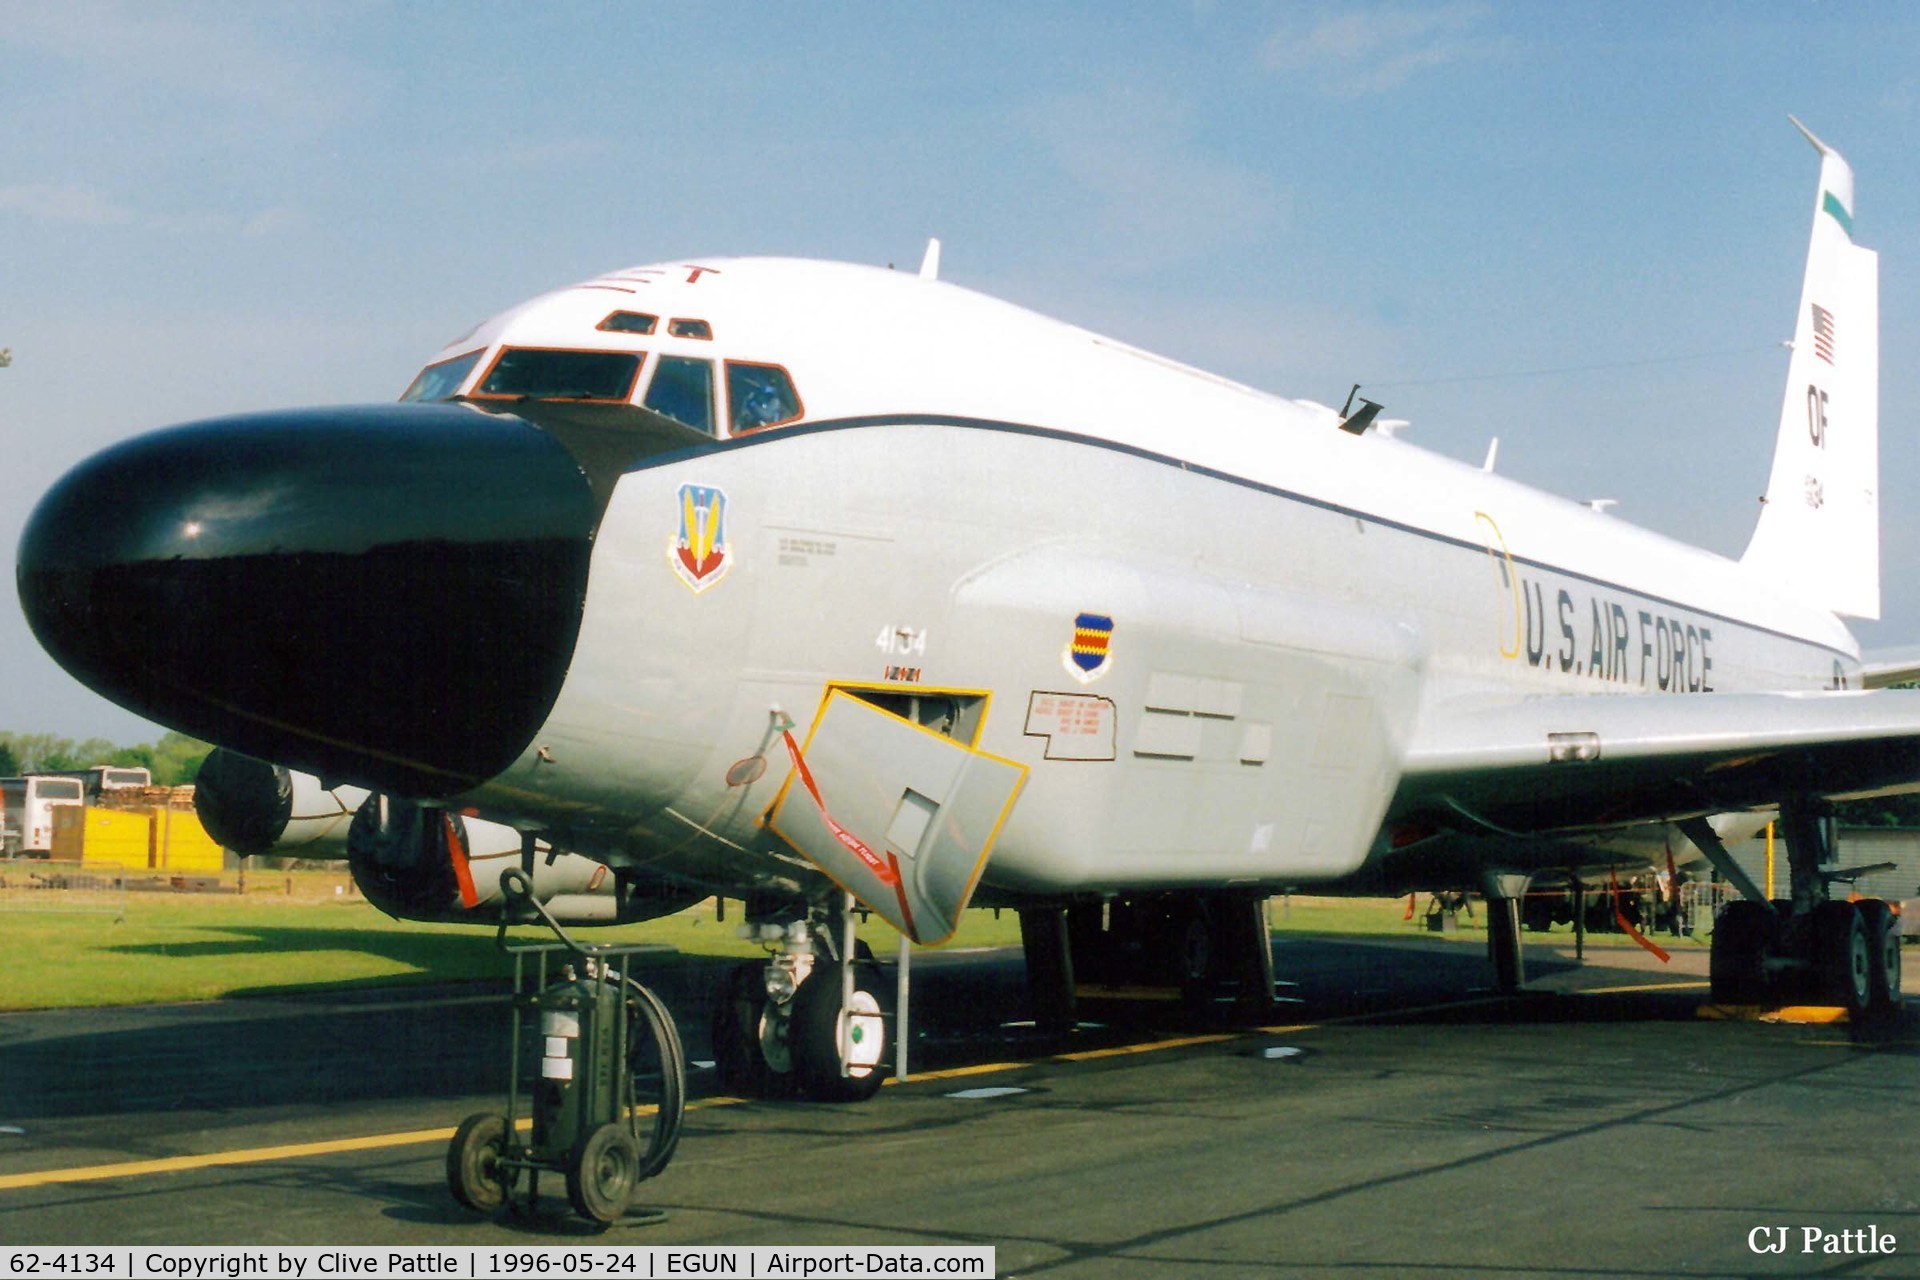 62-4134, 1962 Boeing RC-135W Rivet Joint C/N 18474, Scanned from print. On display at the 1996 Mildenhall Airshow whilst serving with USAF 343RS/55WG at Offett AFB